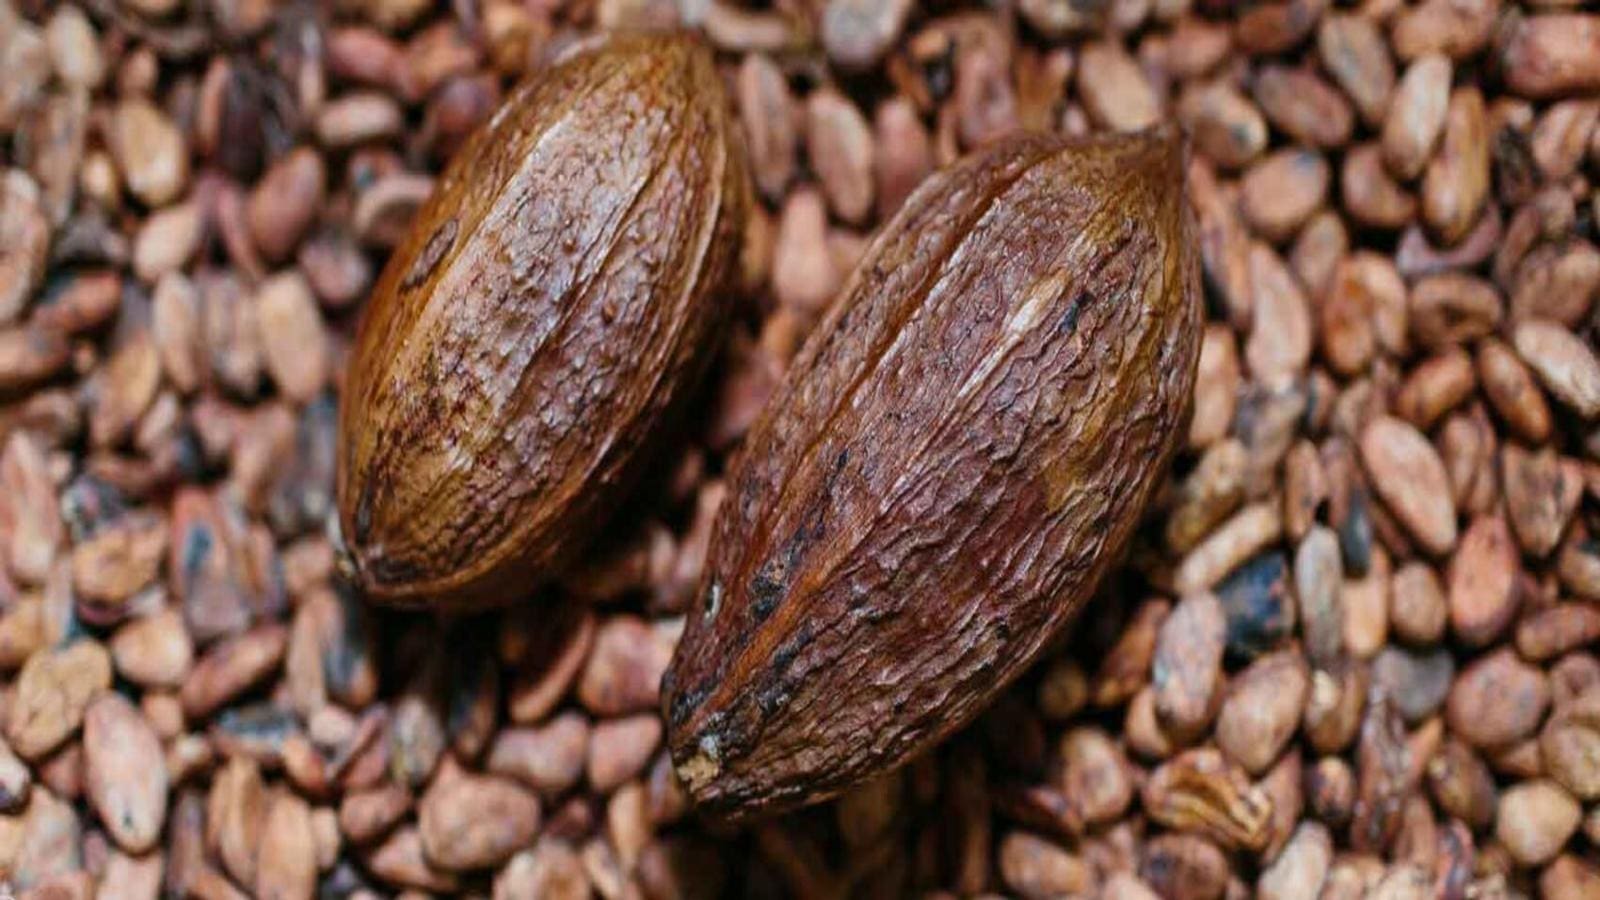 AfDB, ICRAF come to the aid of Ivorian cocoa farmers battling climate change